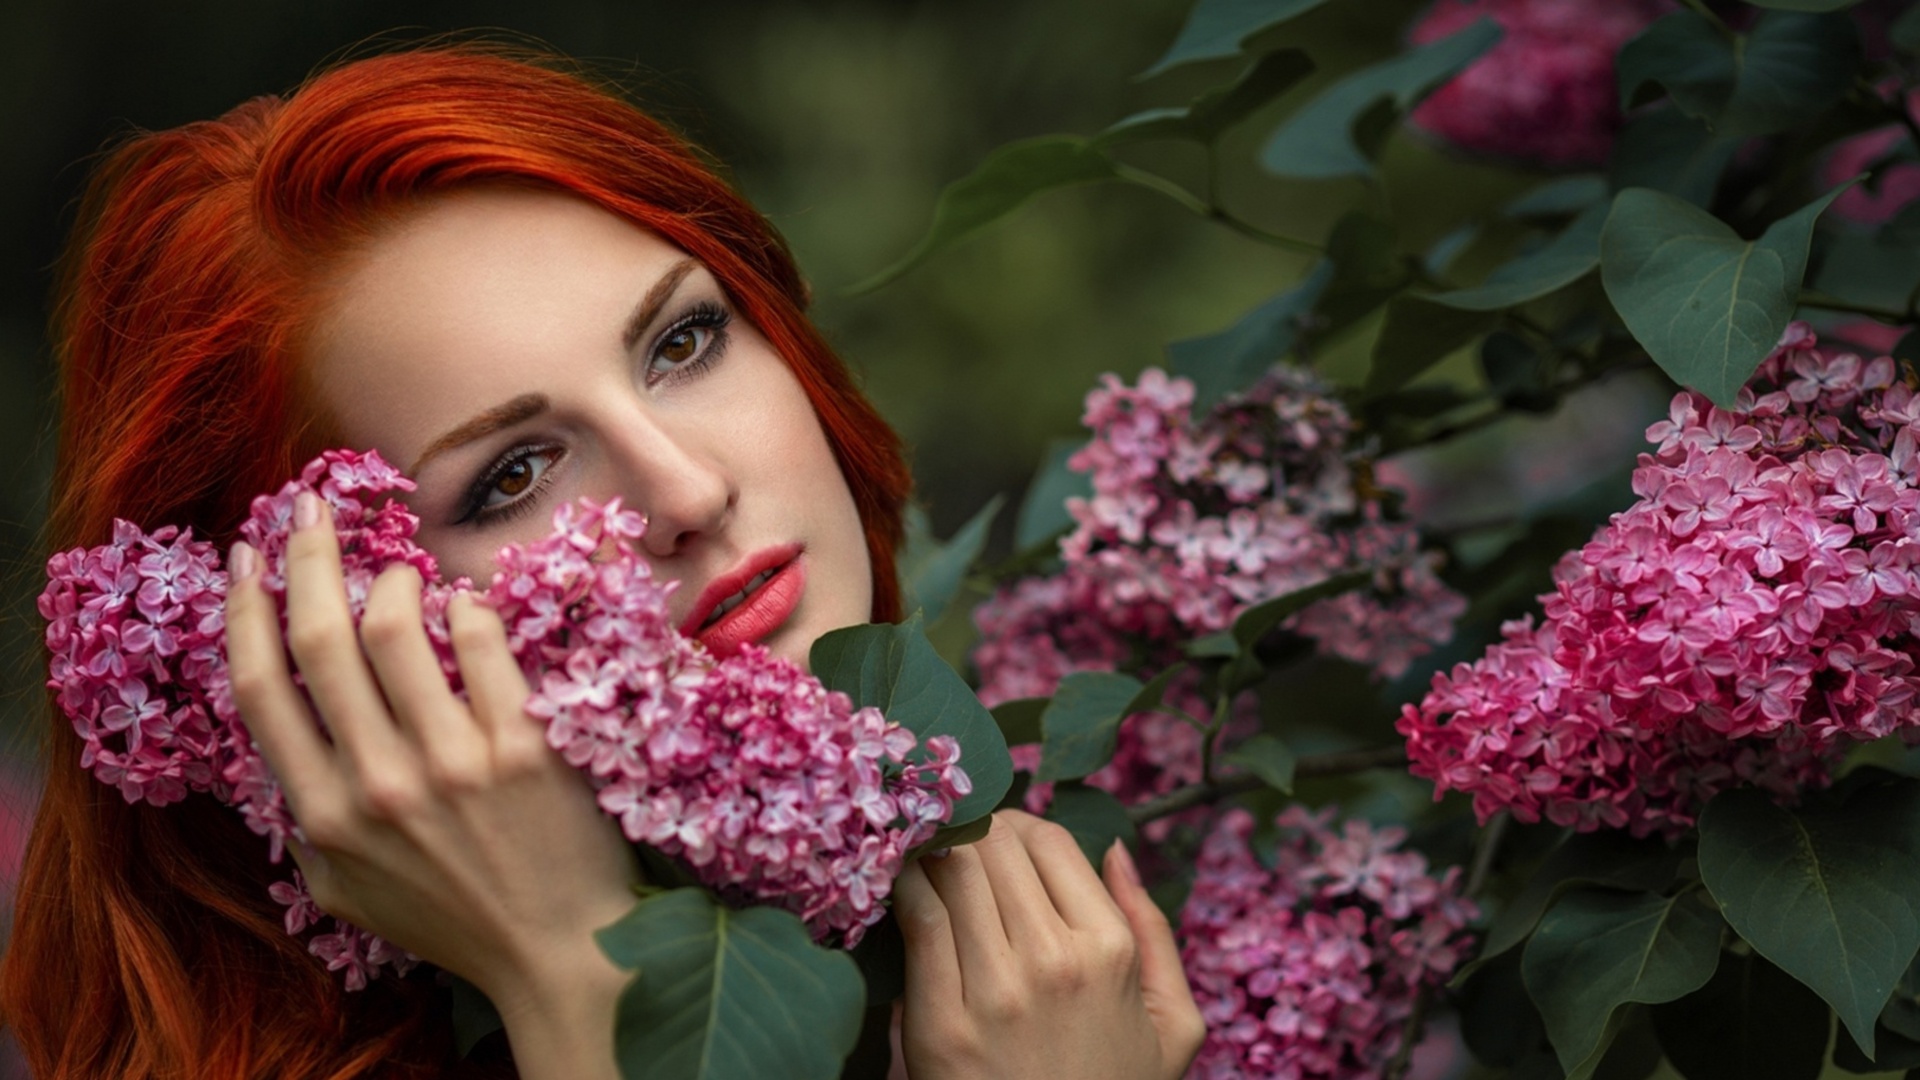 Girl in lilac flowers wallpaper 1920x1080